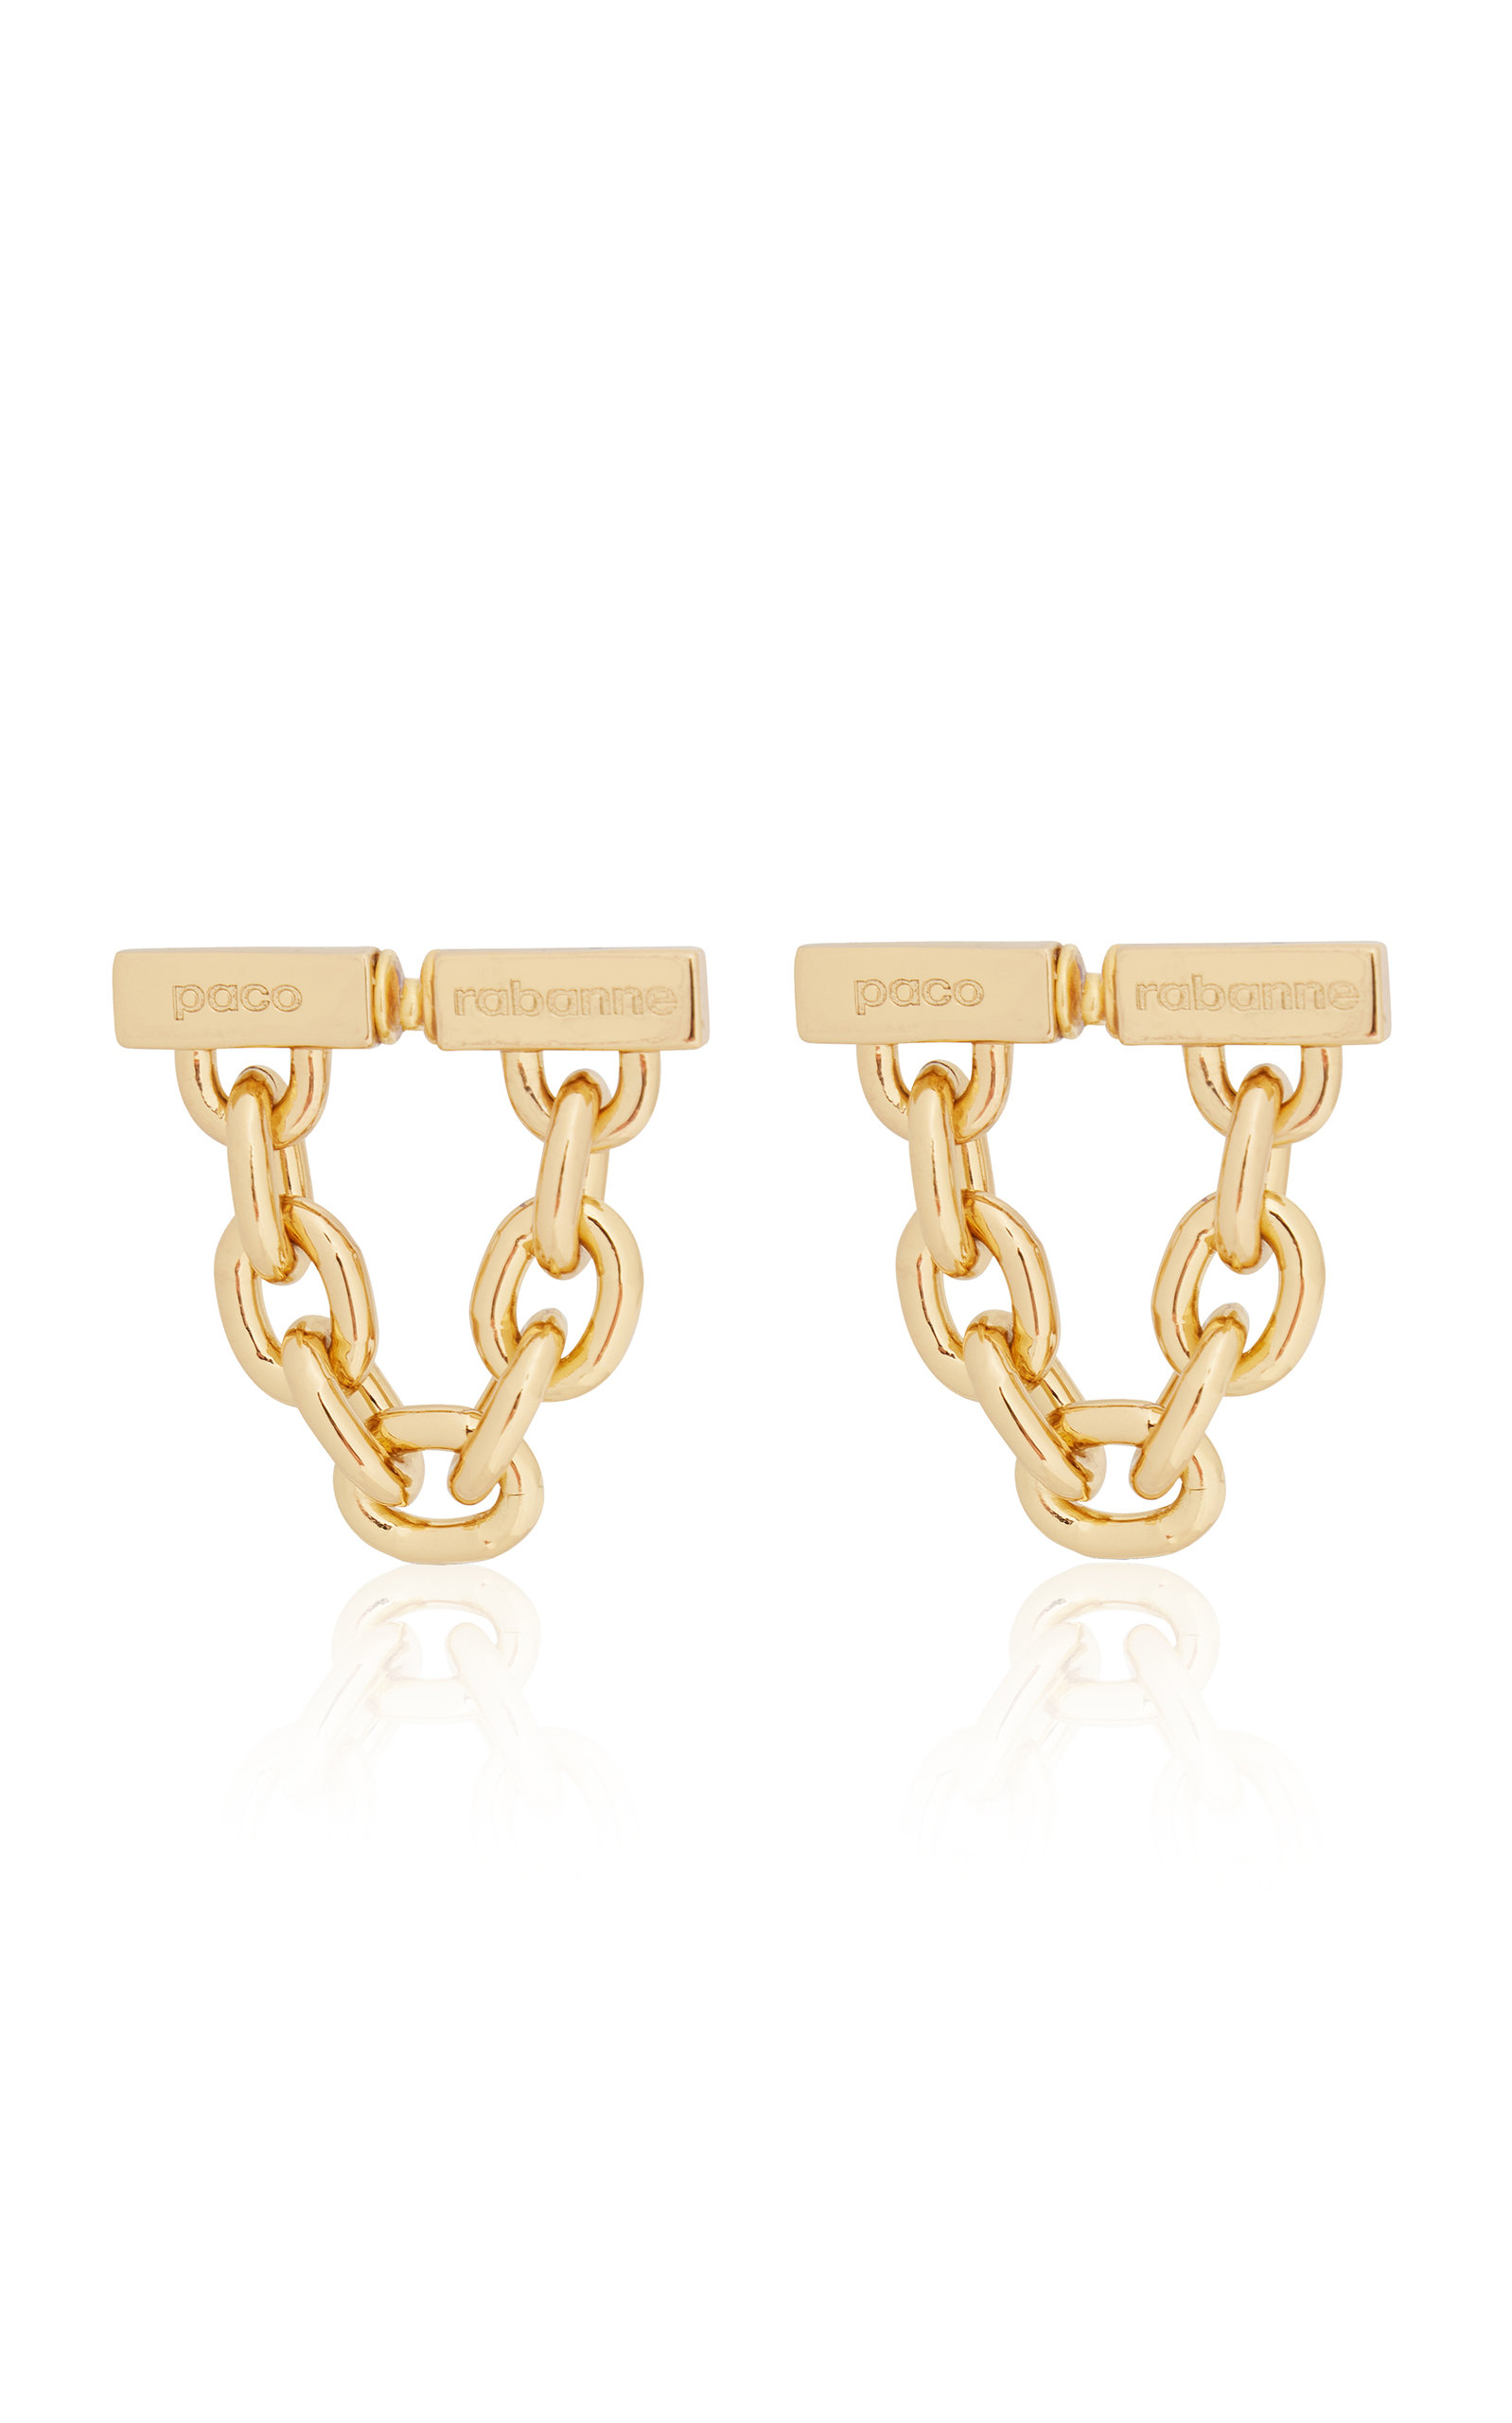 Paco Rabanne - Women's XL Link Chain Earrings - Gold - Only At Moda Operandi - Gifts For Her